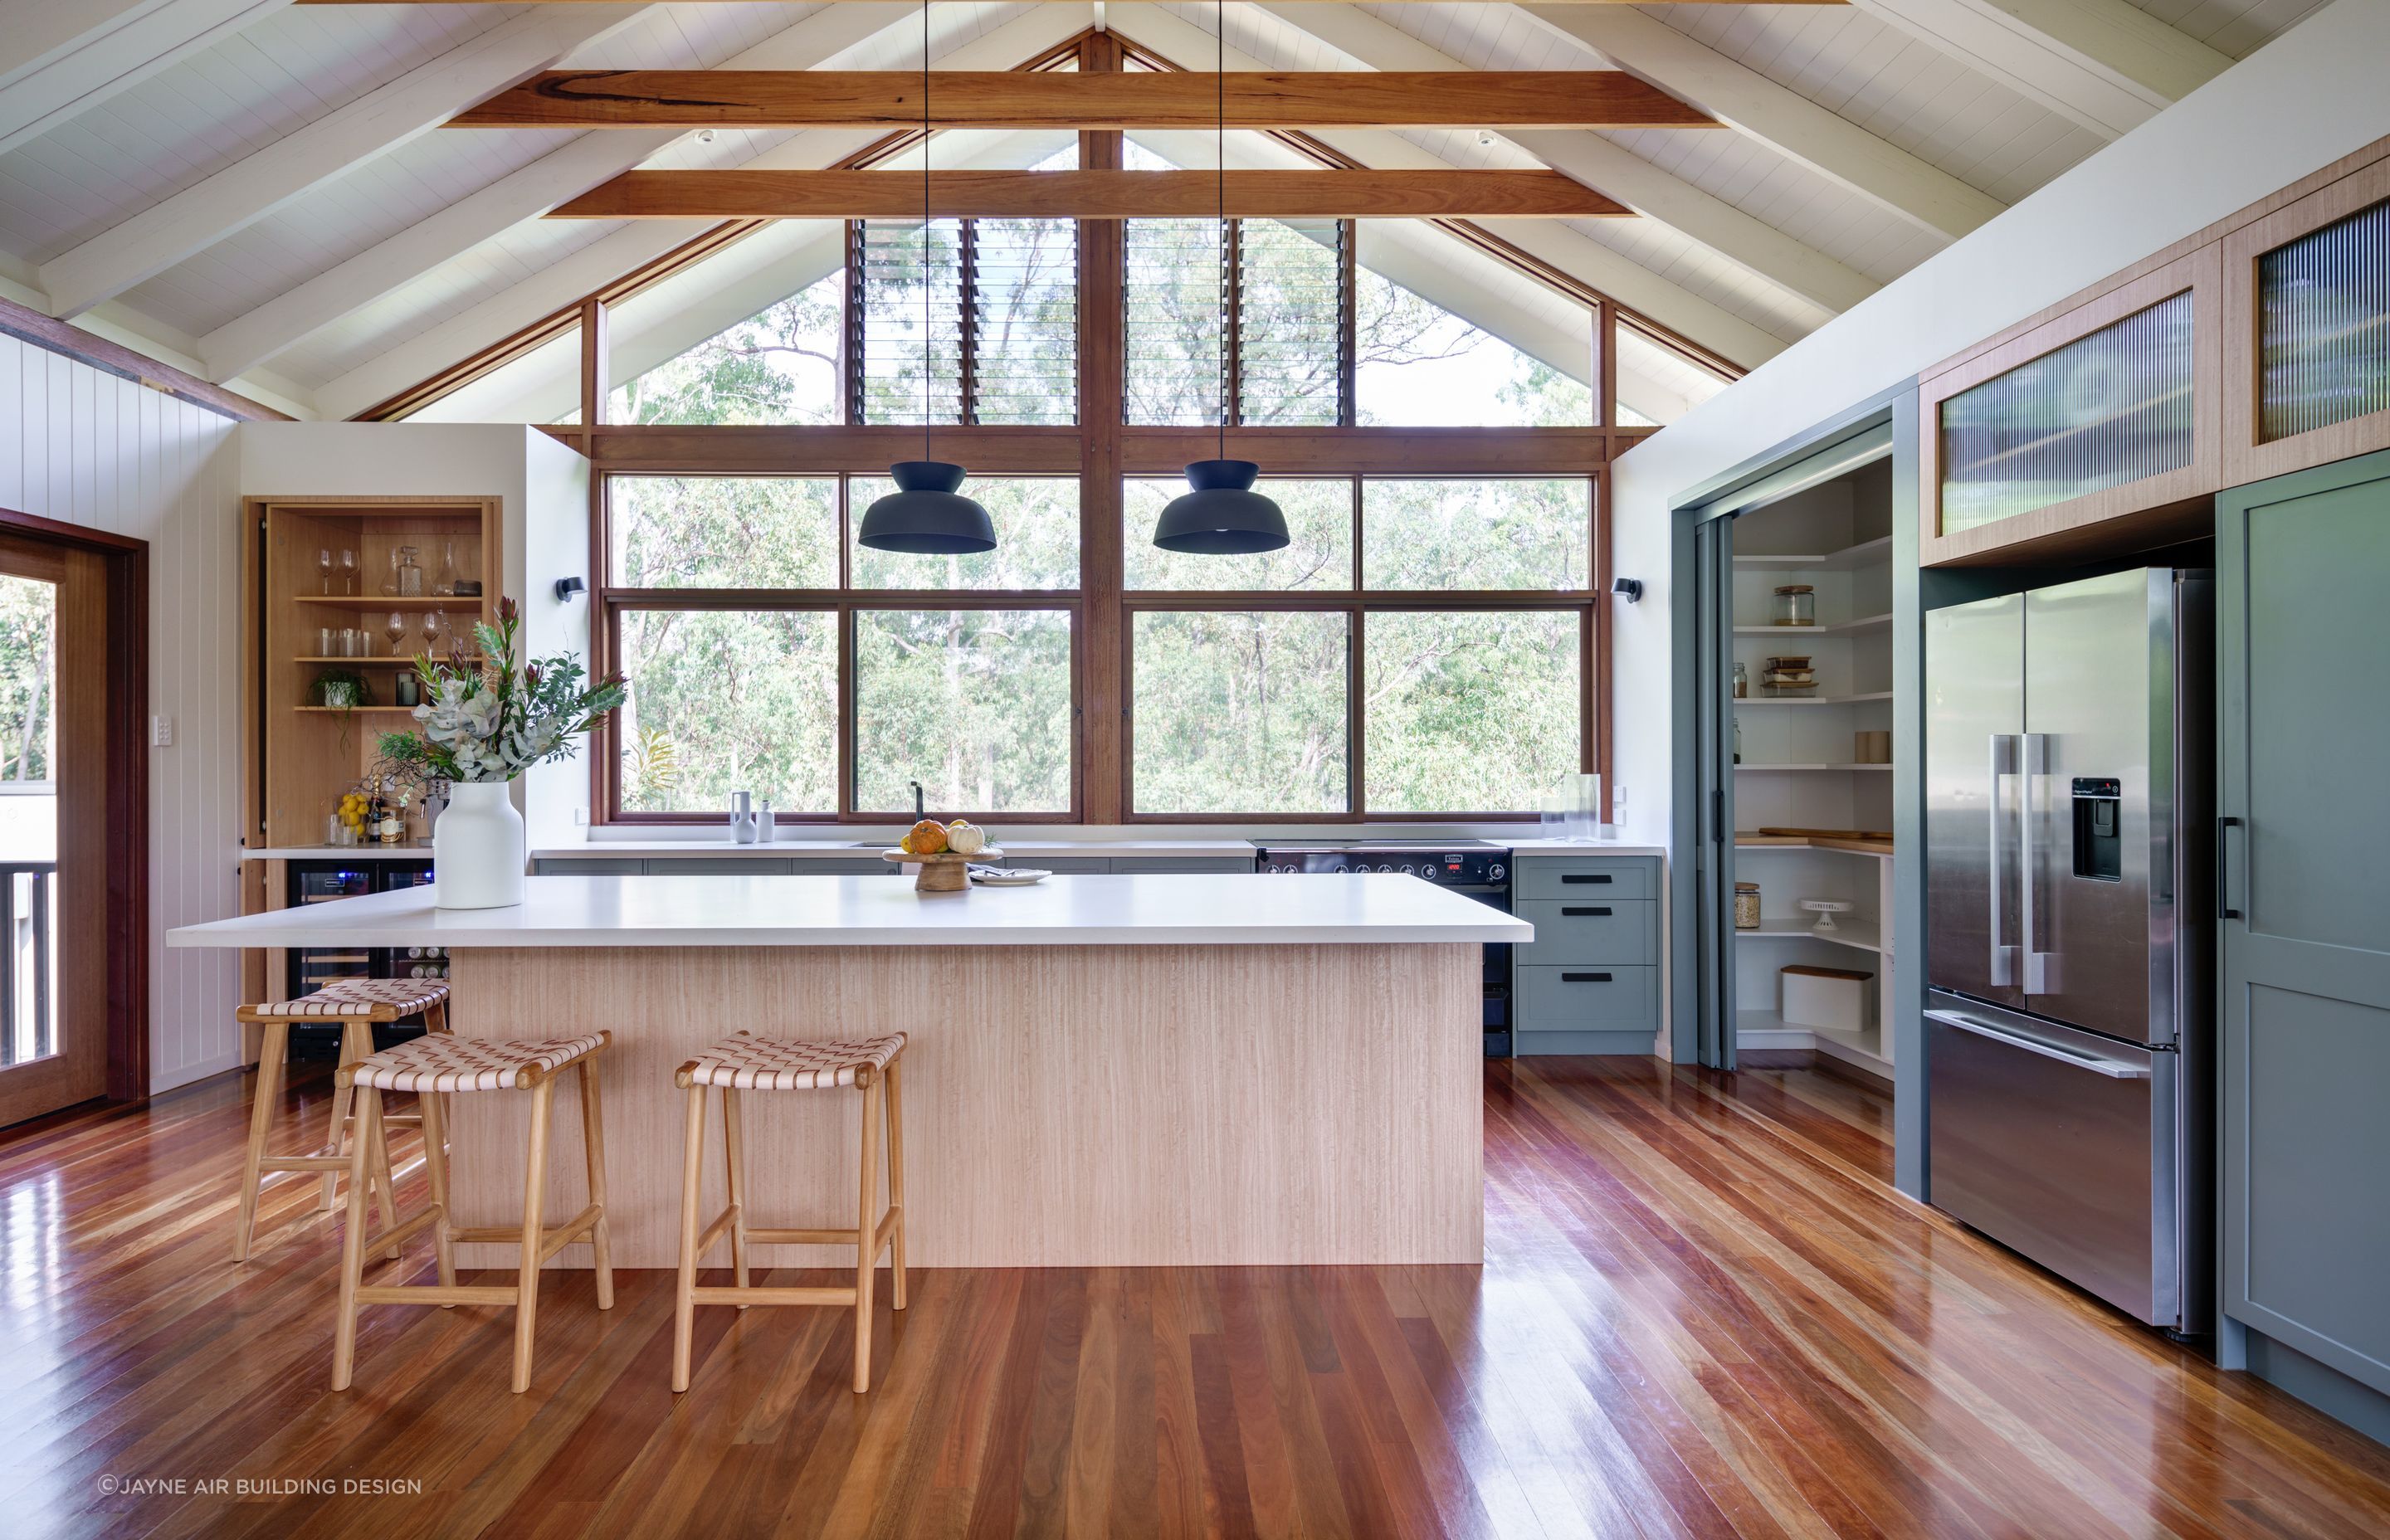 Expansive kitchen windows allow abundant natural light to fill a space, helping to cut down on energy bills while offering great scenic views. Photography: Alan Bouvier.